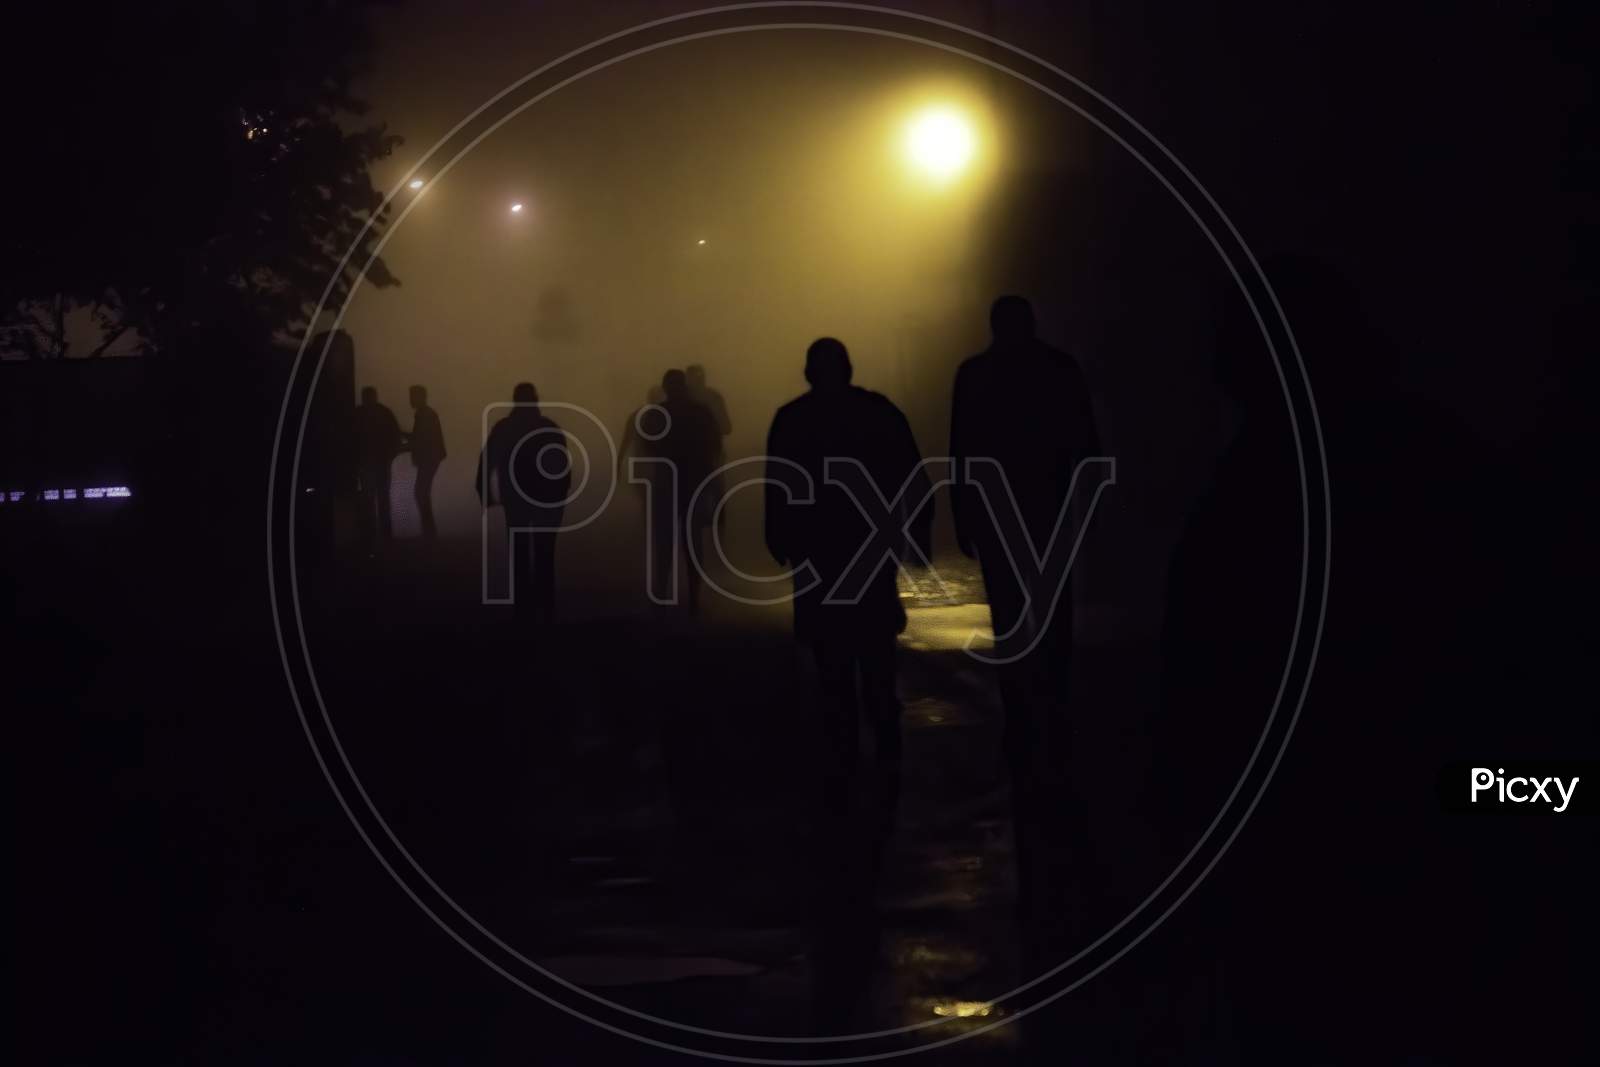 Krakow, Poland - September 20, 2014: People Leave After Concert In A Late Foggy Night